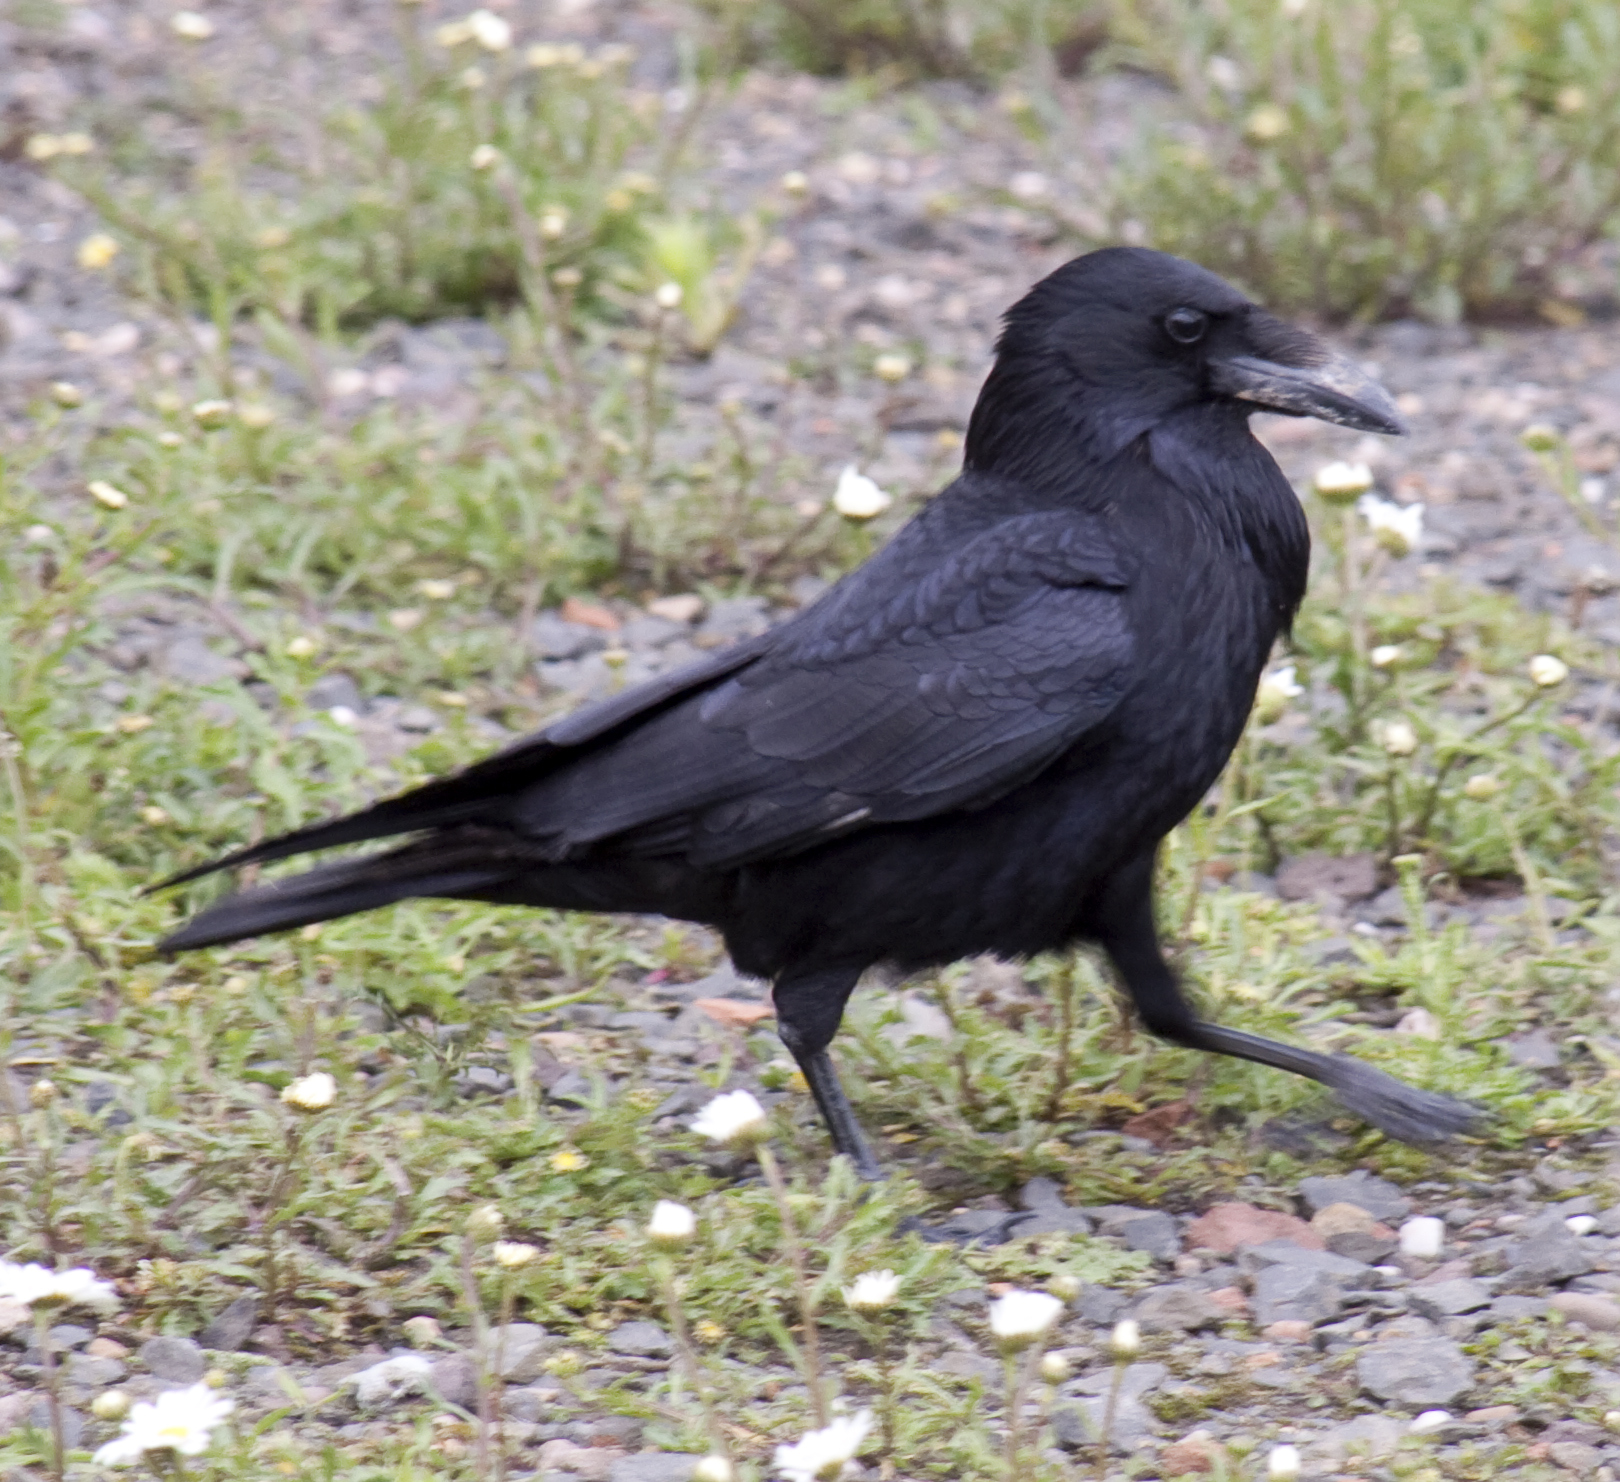 a black bird standing on grass and flowers